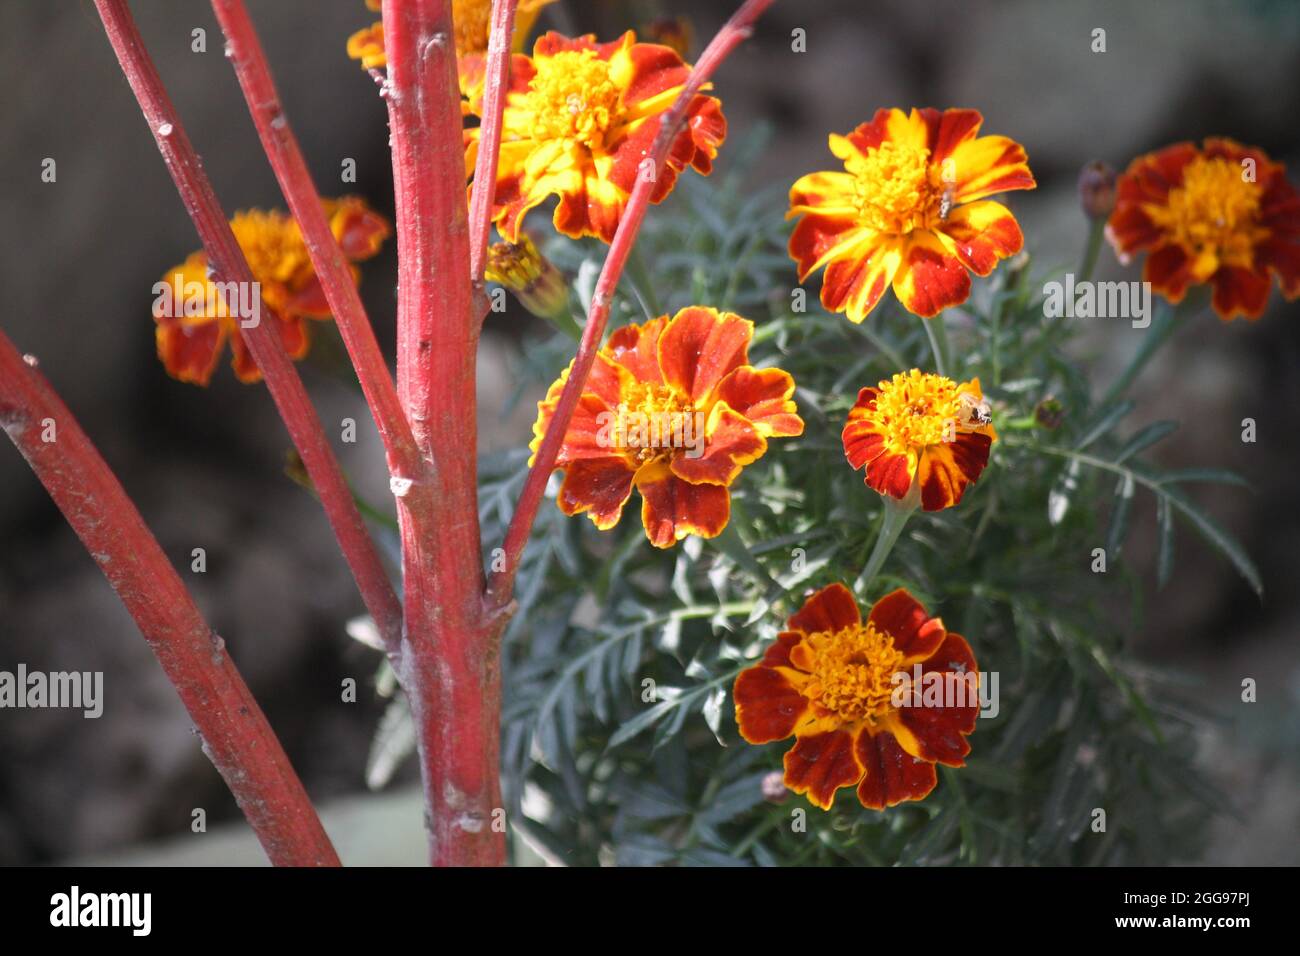 Cluster of French marigold (Tagetes patula) flowers Stock Photo